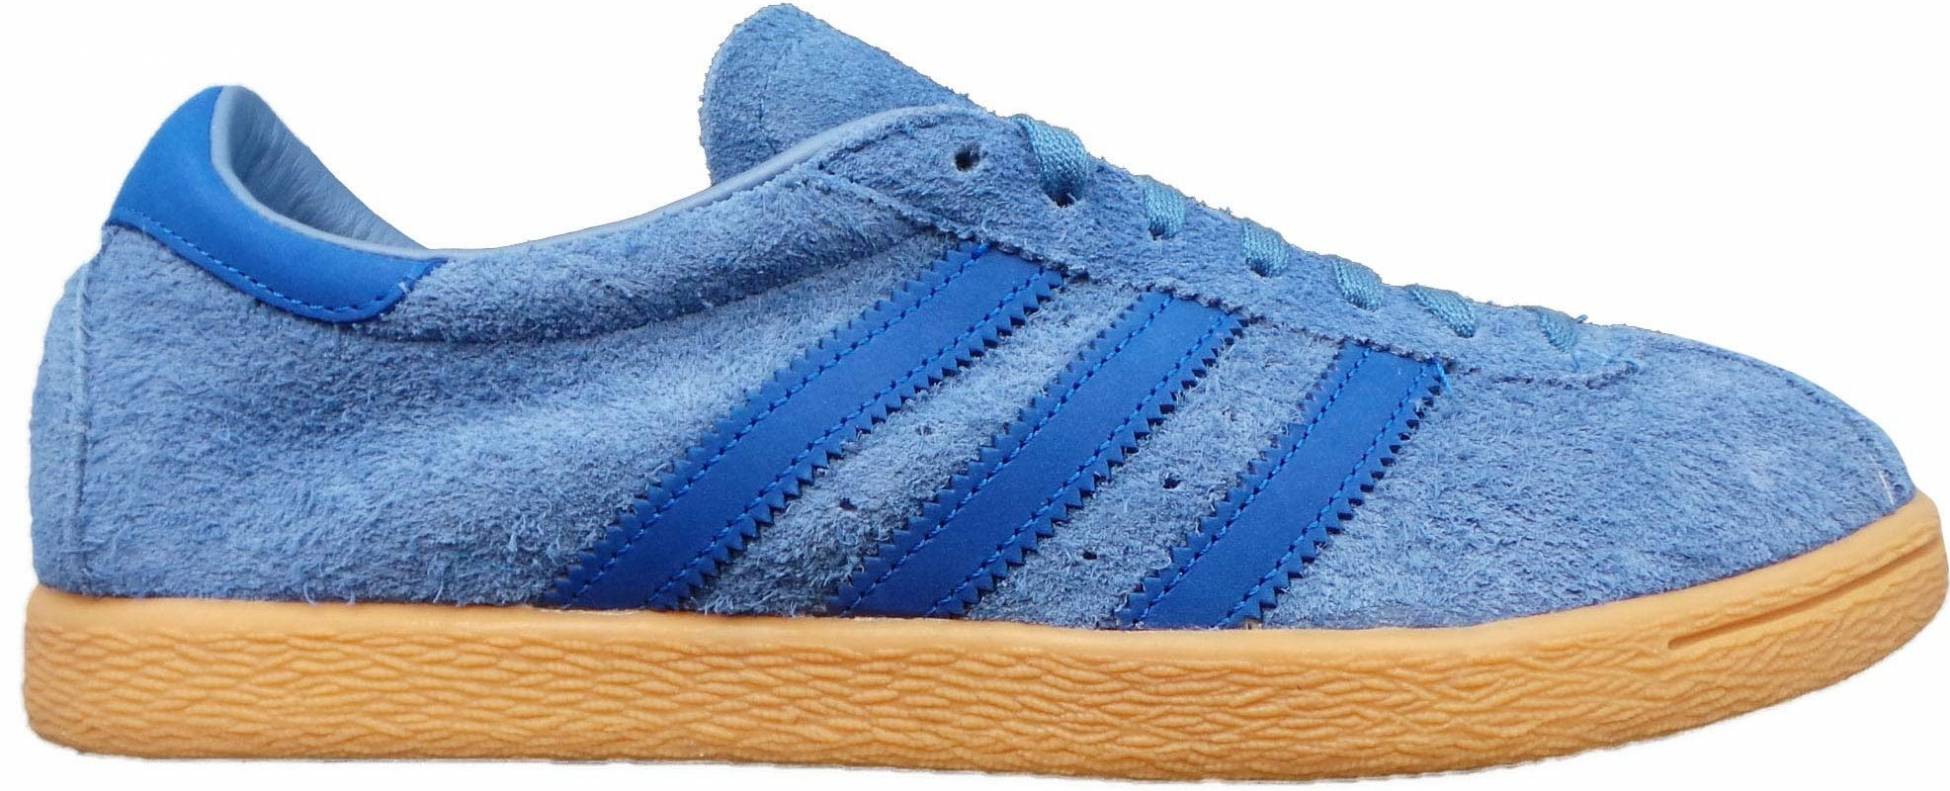 11 Reasons to/NOT to Buy Adidas Tobacco 